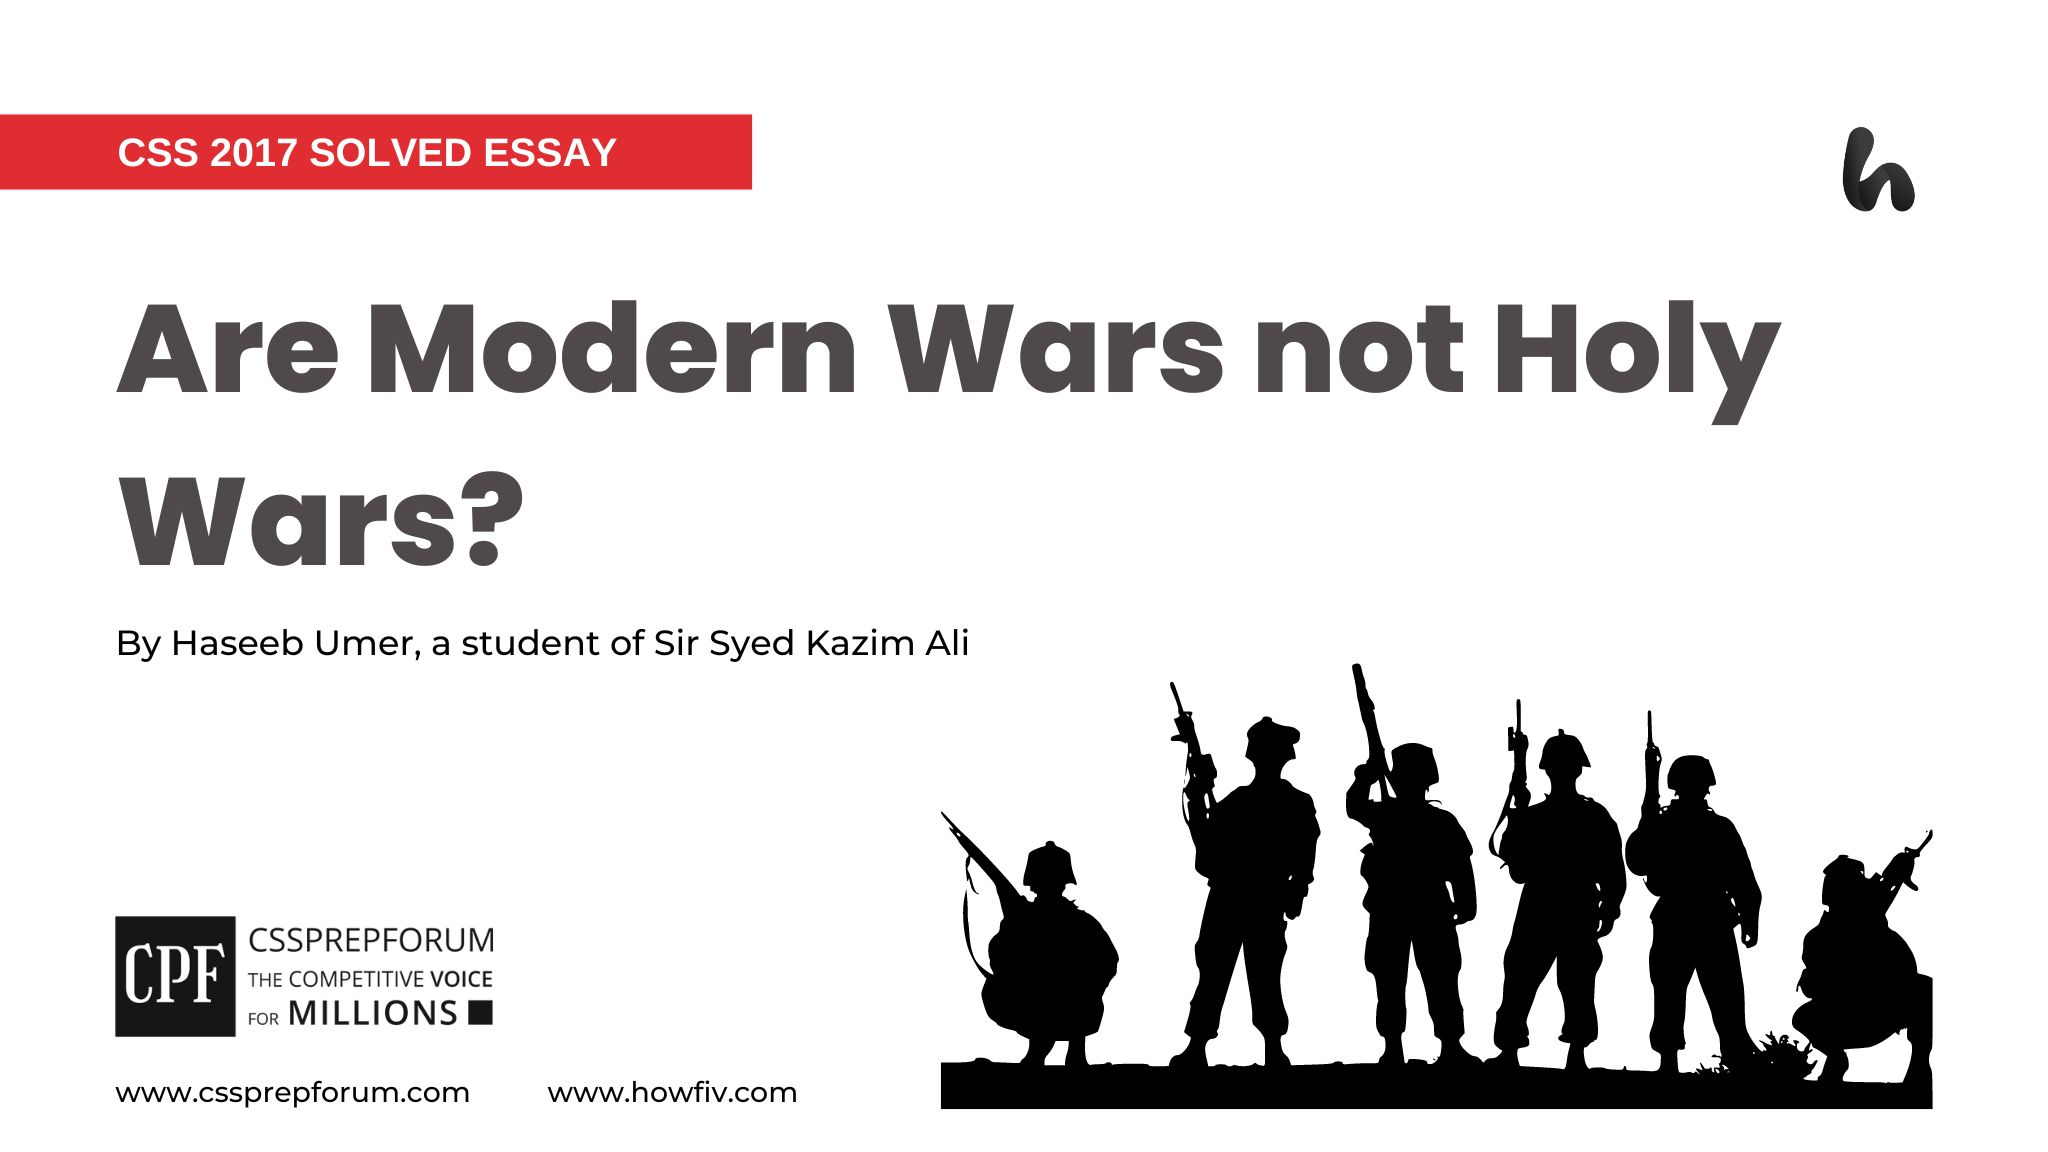 Are Modern Wars not Holy Wars? By Haseeb Umer